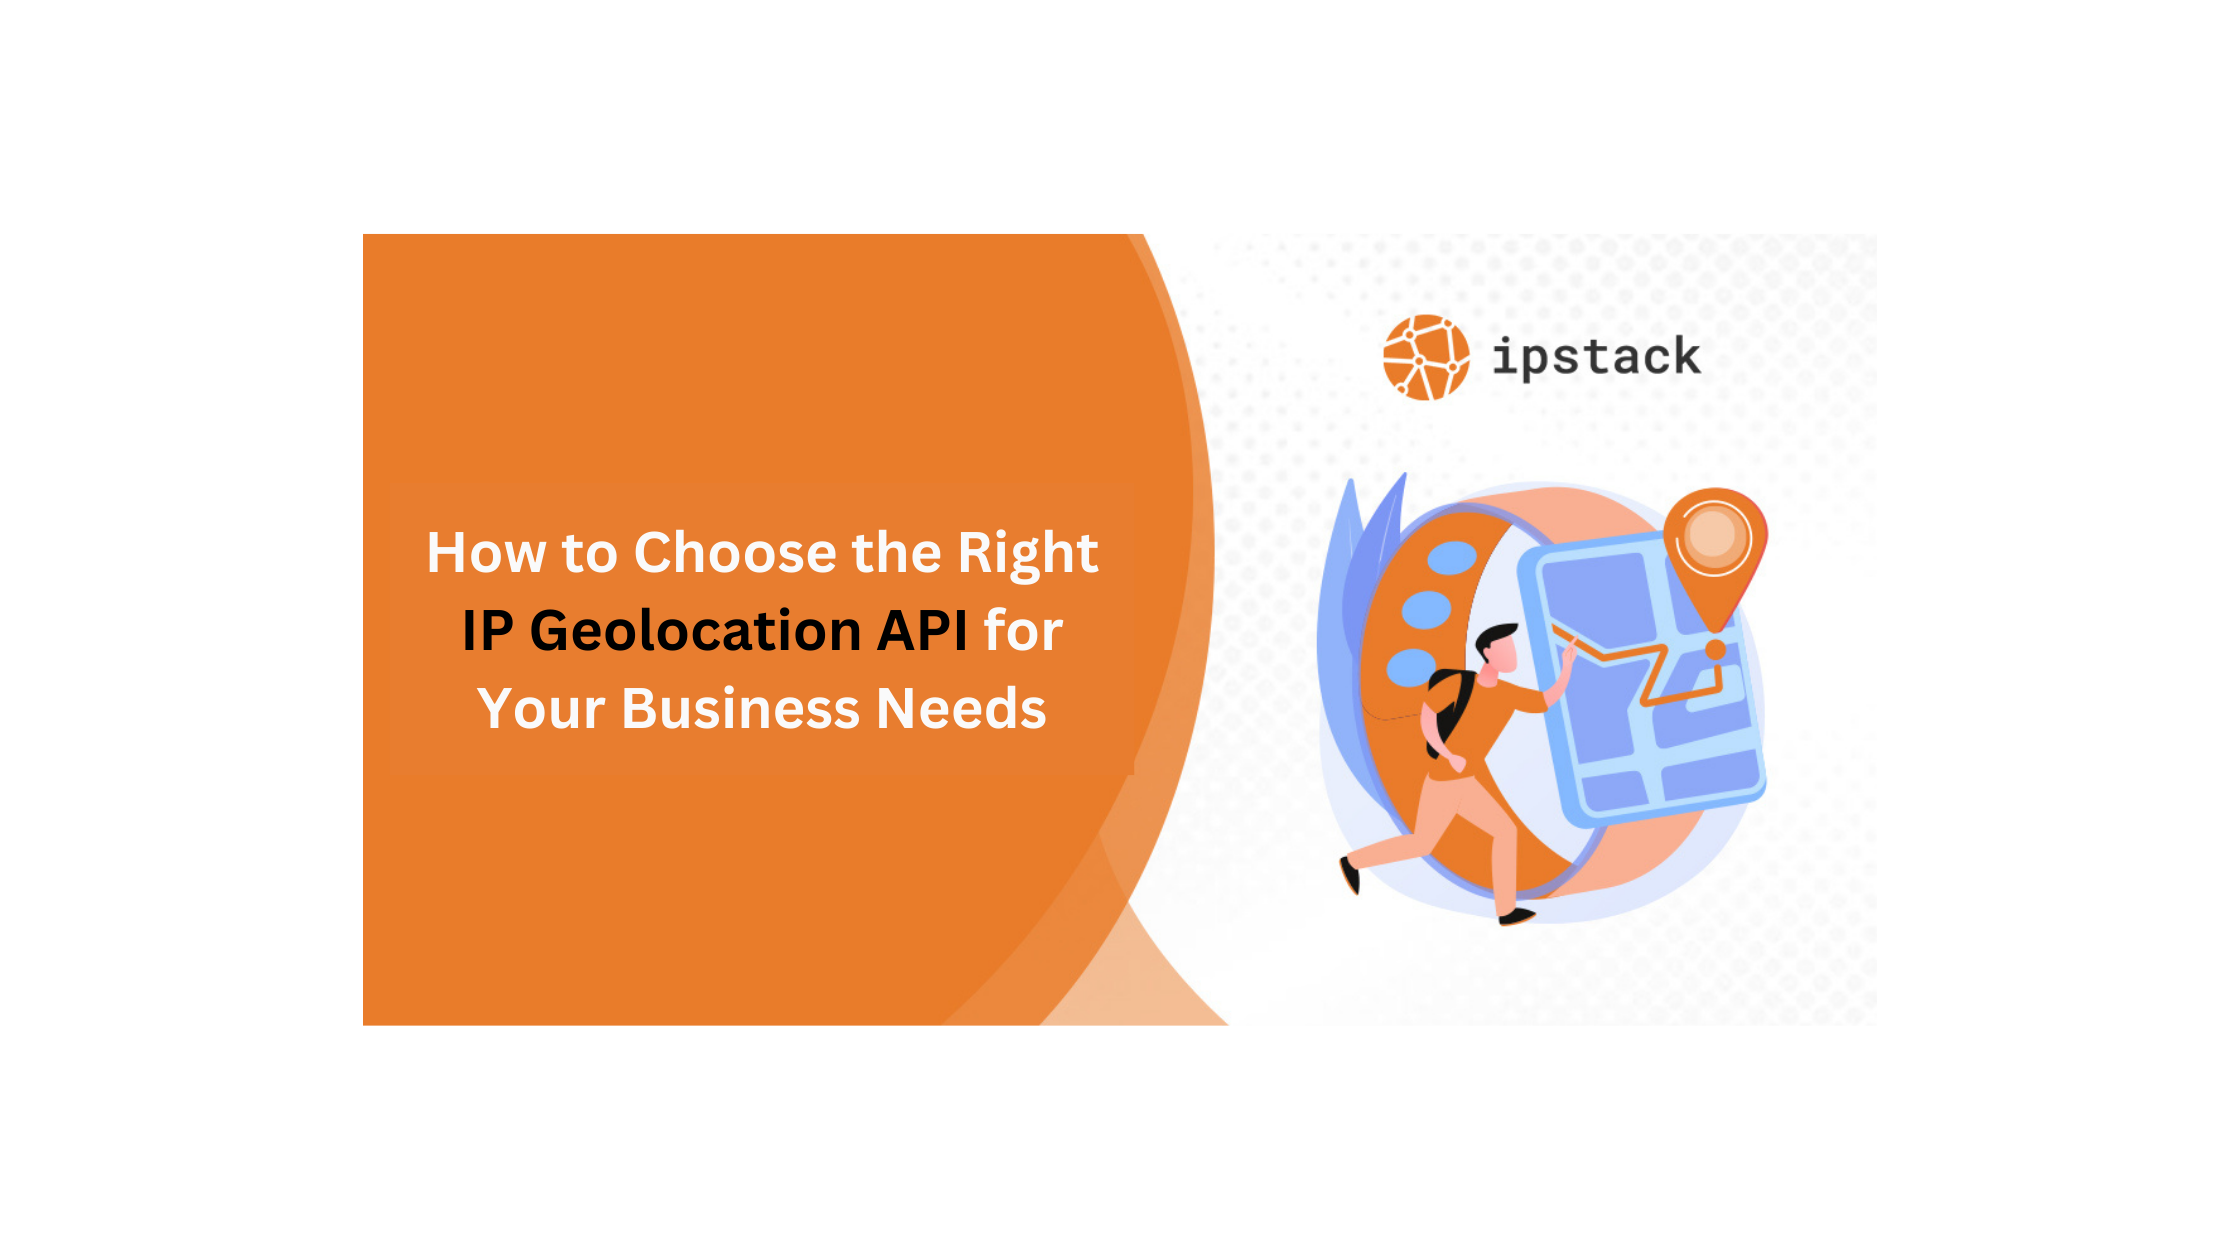 How to Choose the Right IP Geolocation API for Your Business